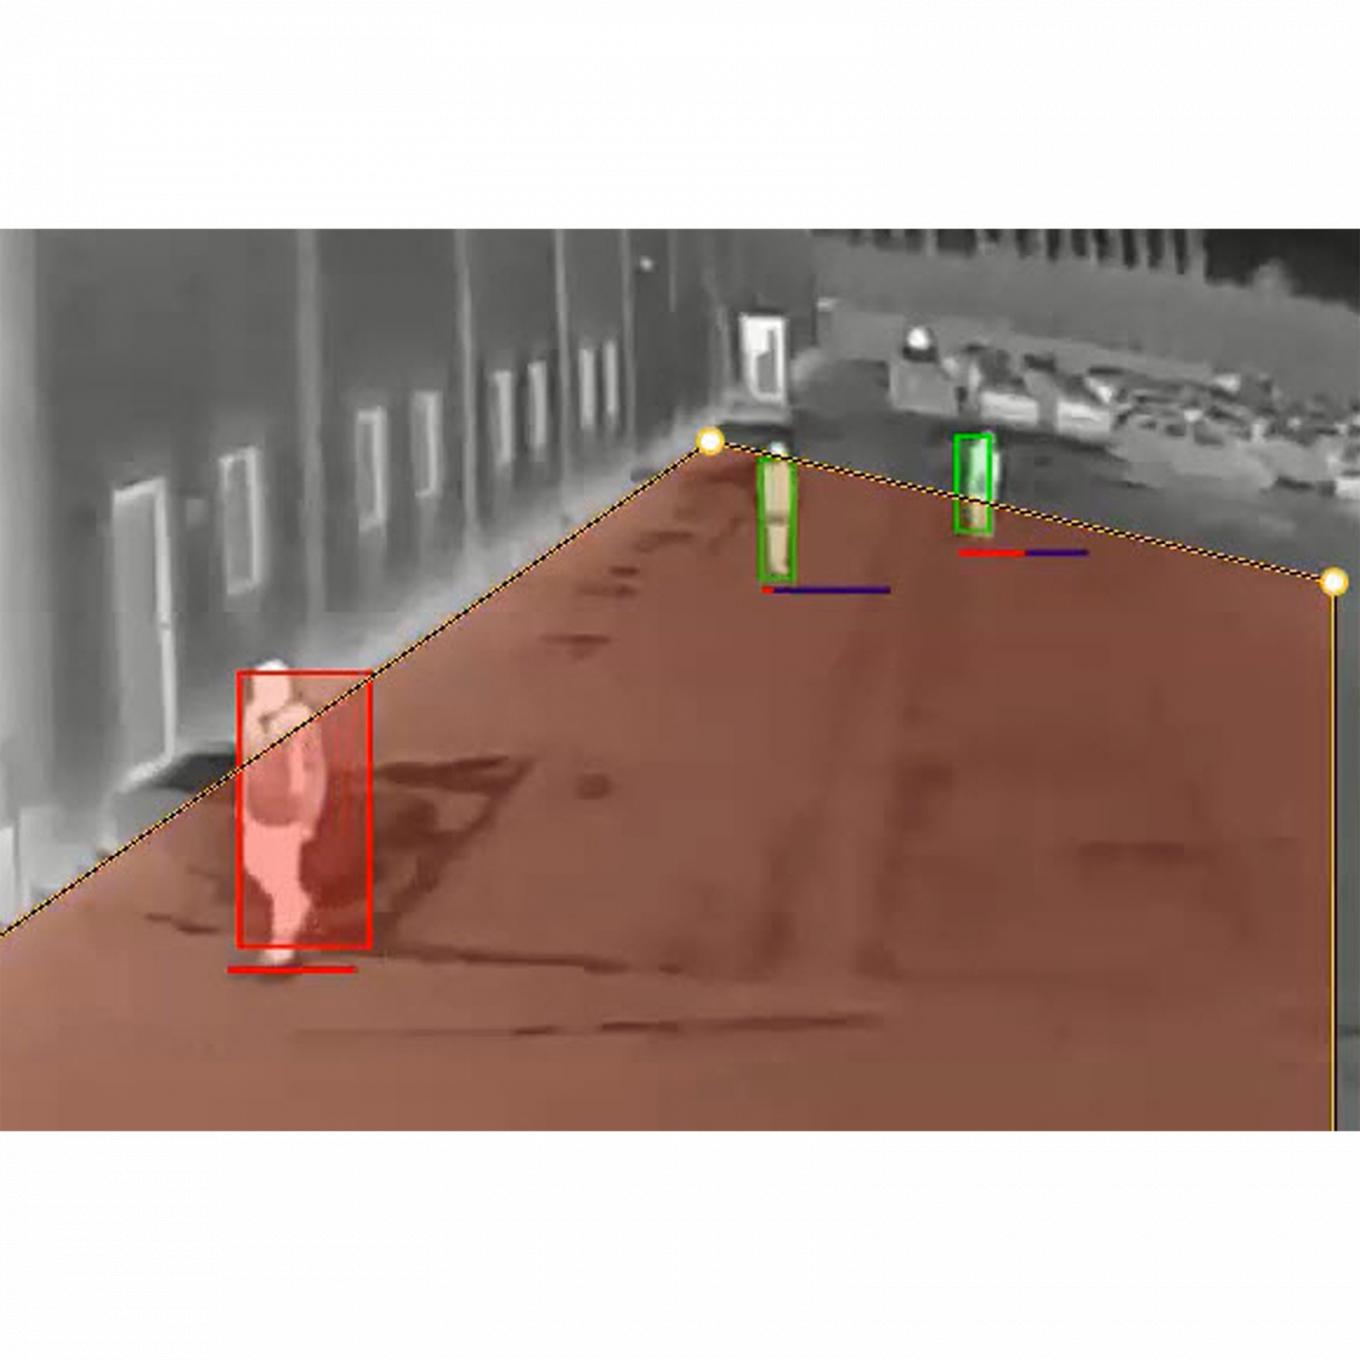 Objects being tracked by AXIS Loitering Guard